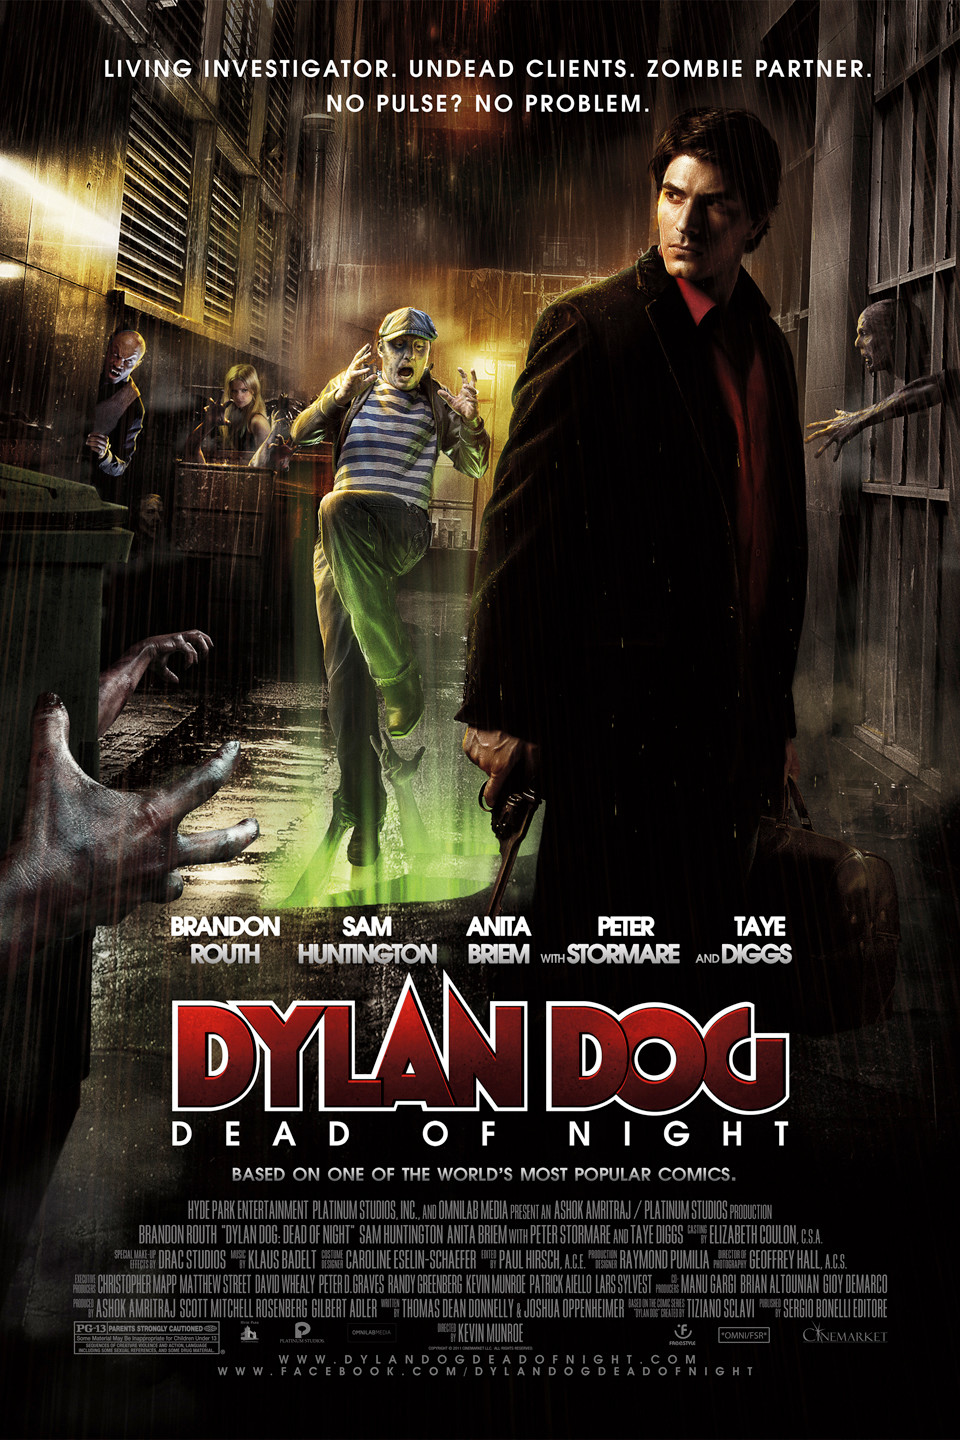 Transitorio Huerta Antorchas Dylan Dog: Dead of Night - Rotten Tomatoes